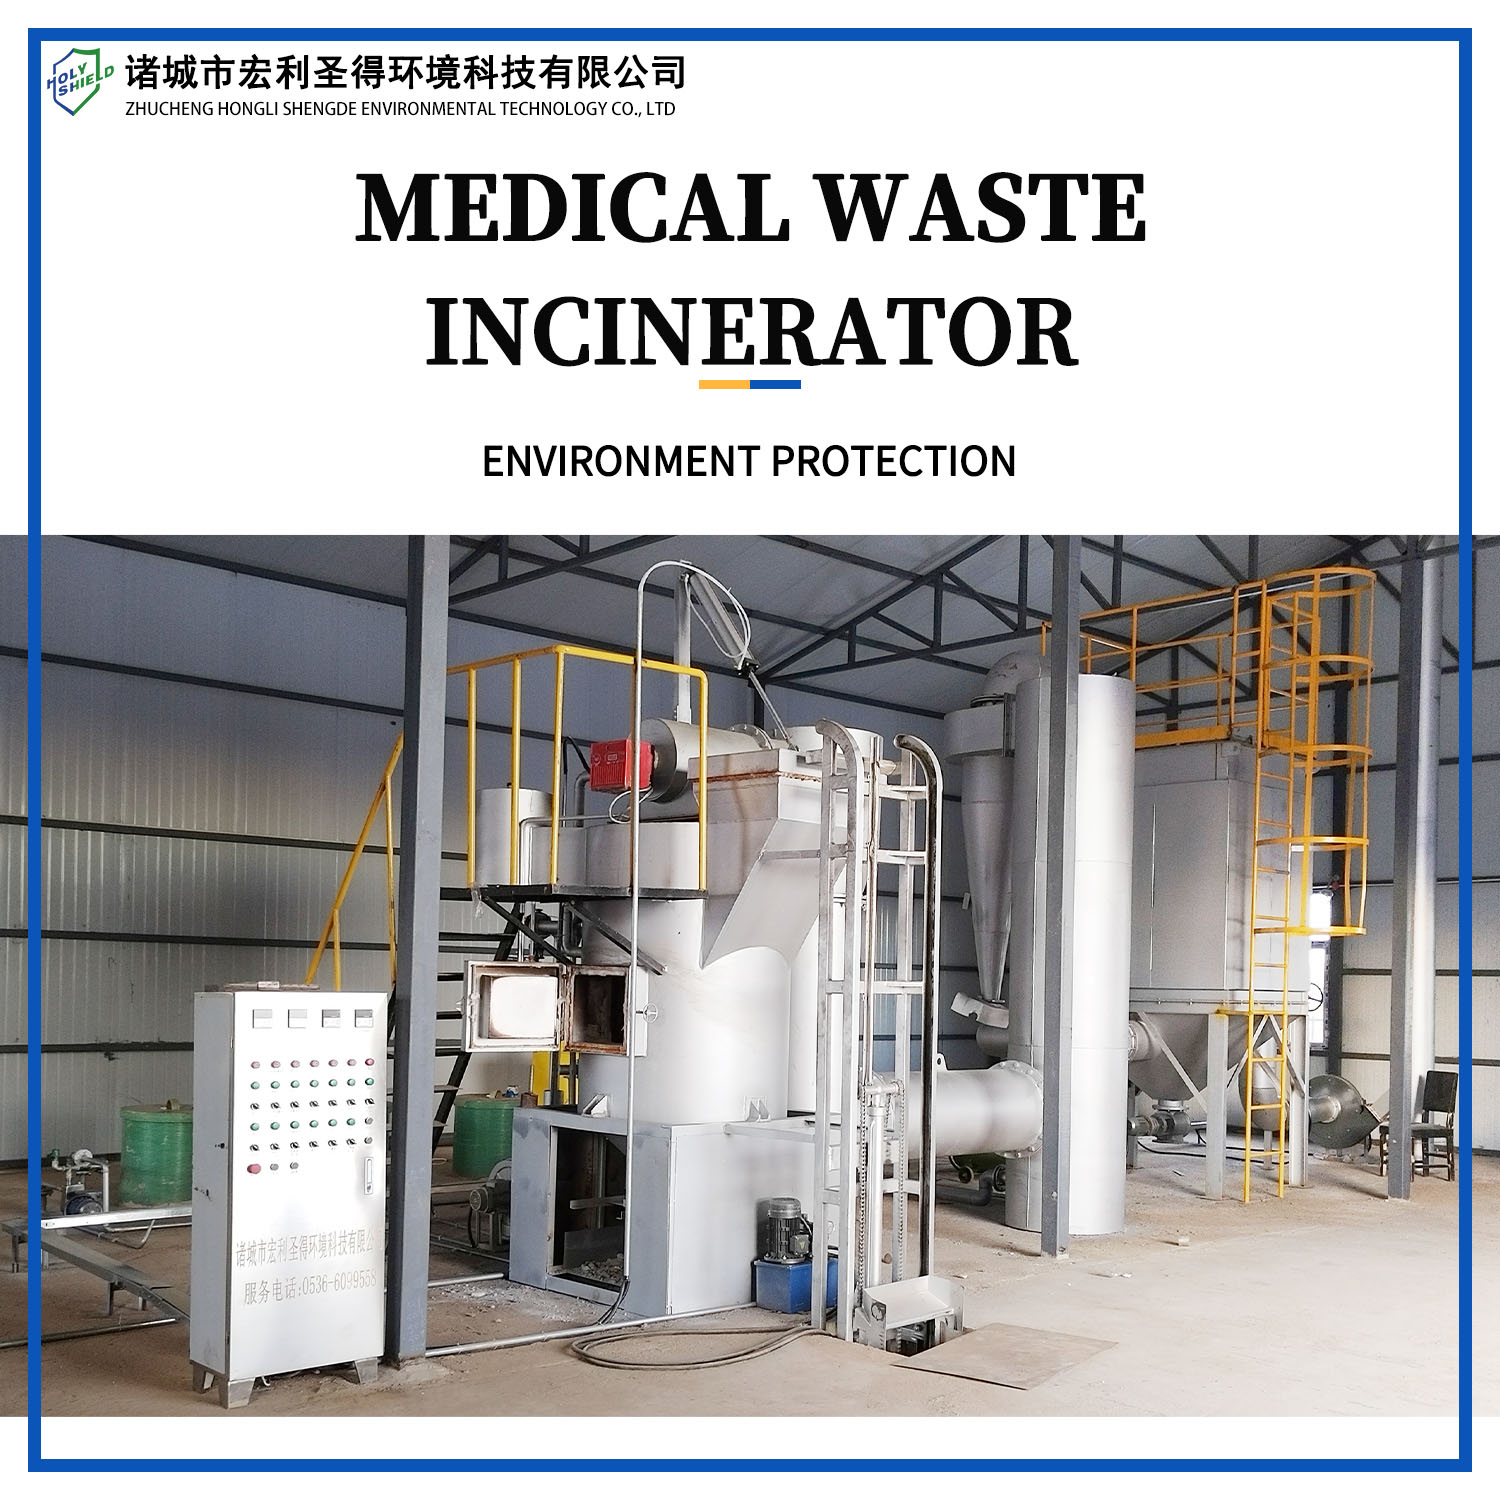 Small incinerators that burn medical waste without ambiguity